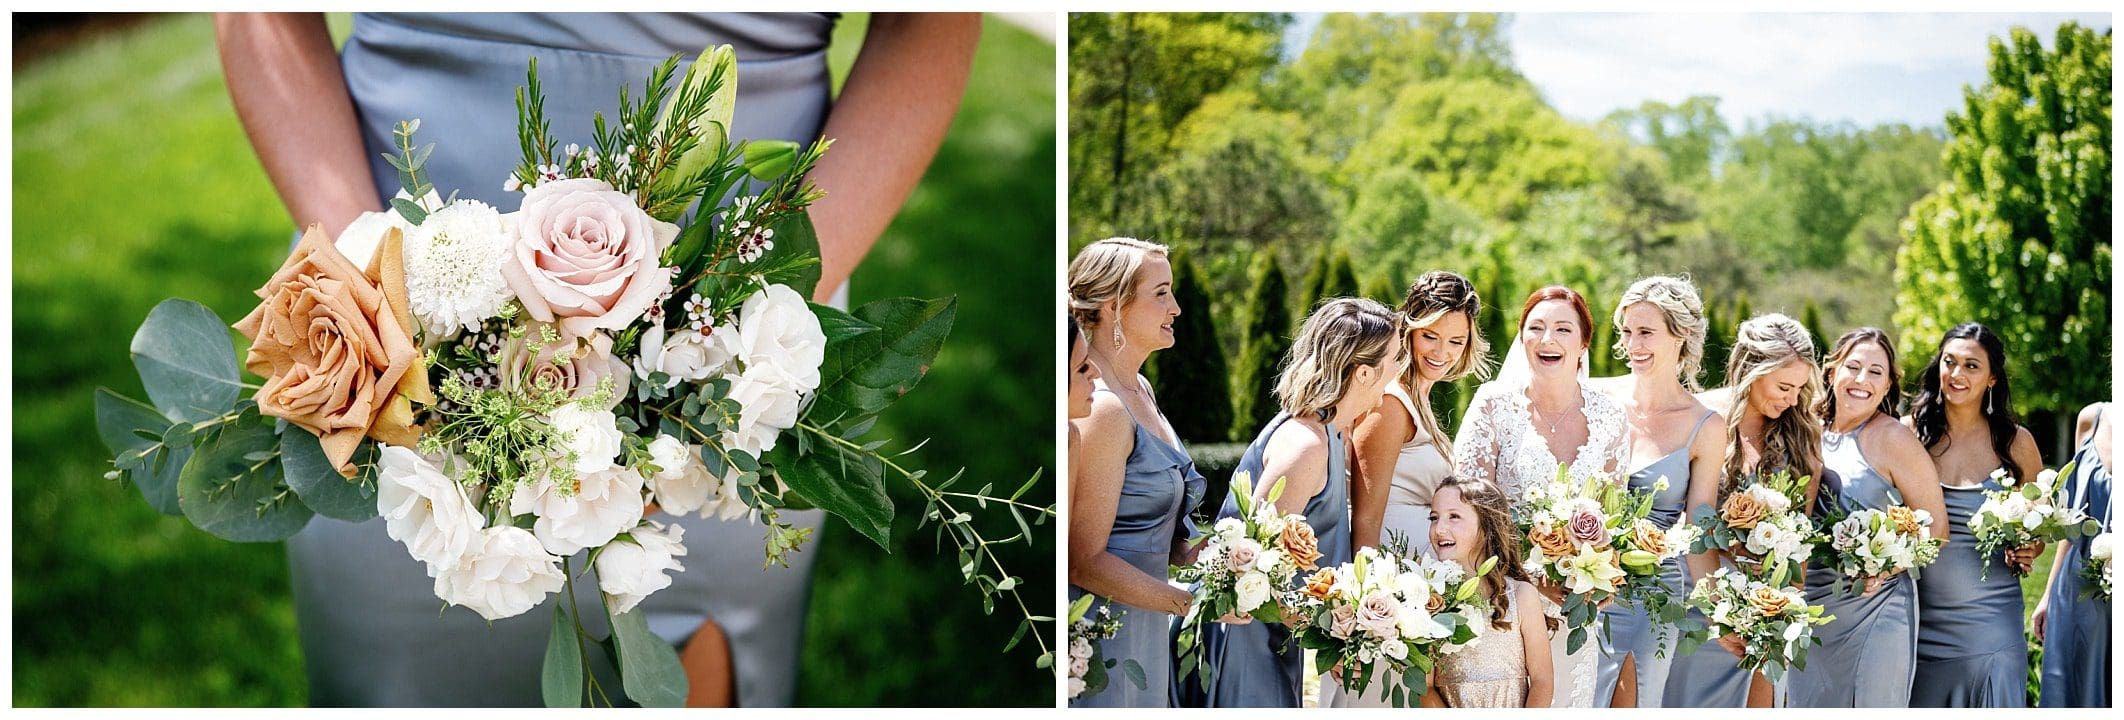 Bride laughing with bridesmaids while holding flowers at spring destination wedding at Chestnut Ridge